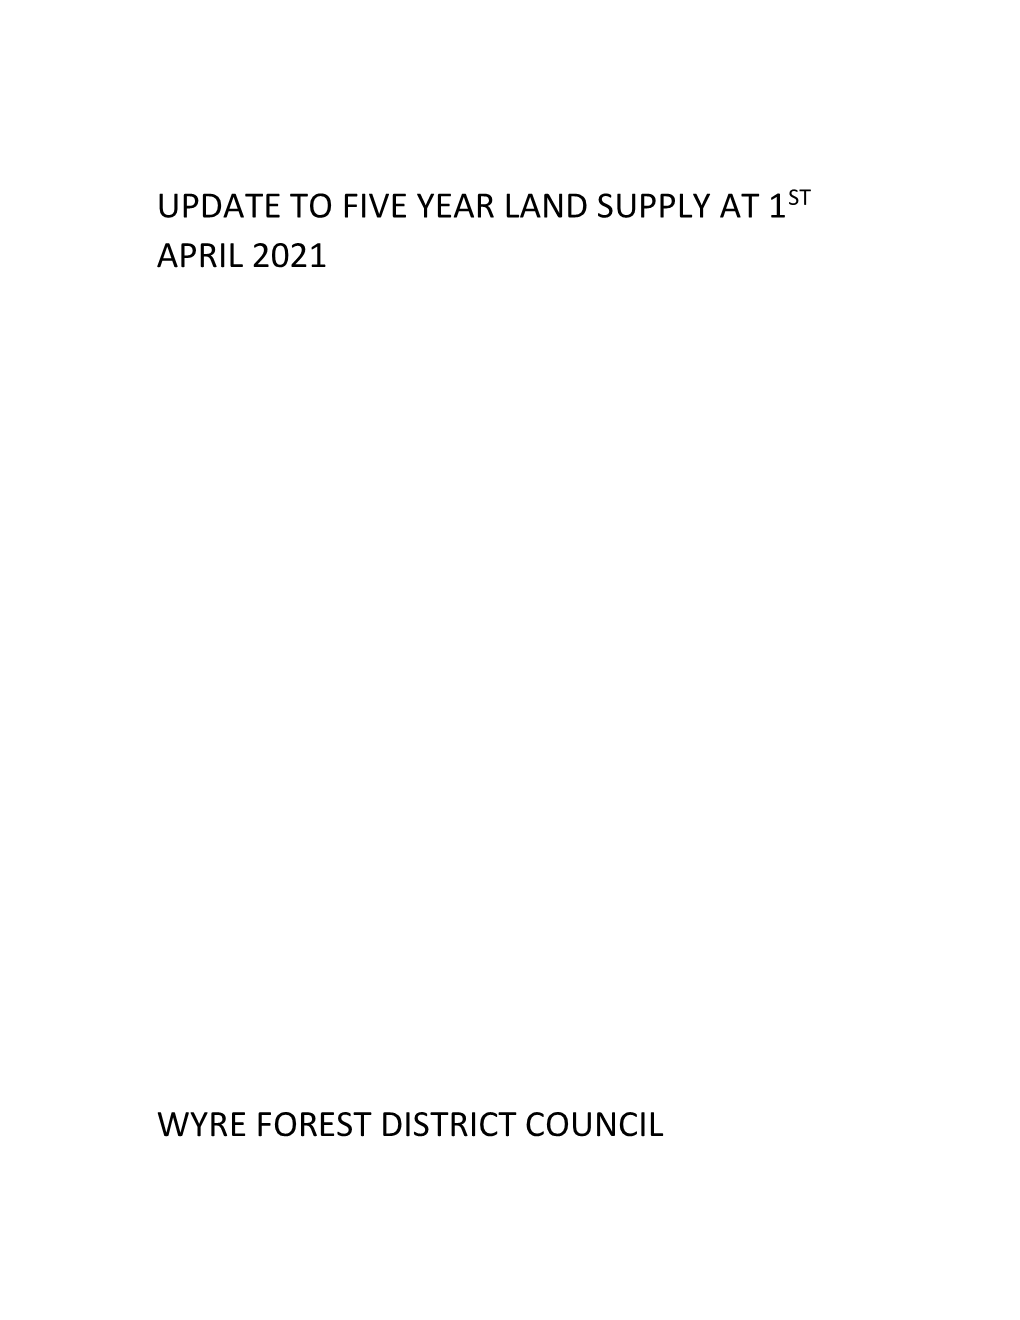 Update to Five Year Land Supply at 1St April 2021 Wyre Forest District Council